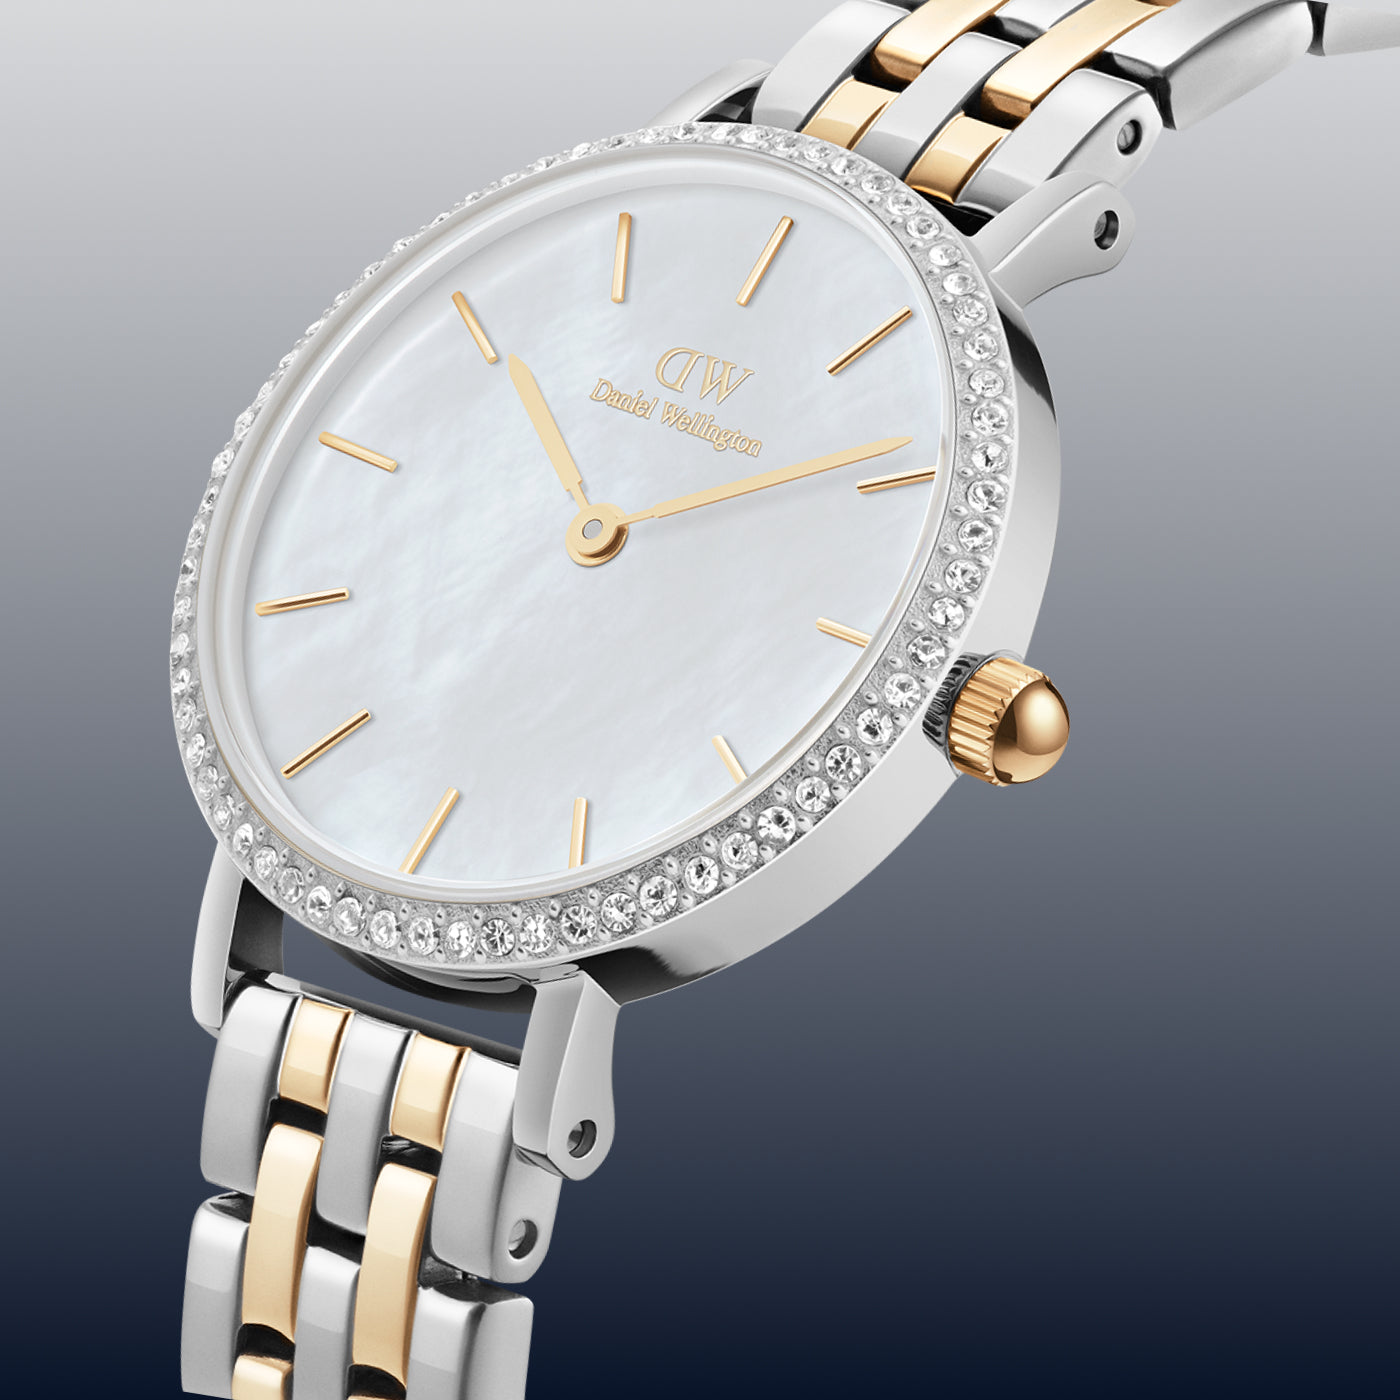 Petite Lumine - Watch with pink mother of pearl dial | DW